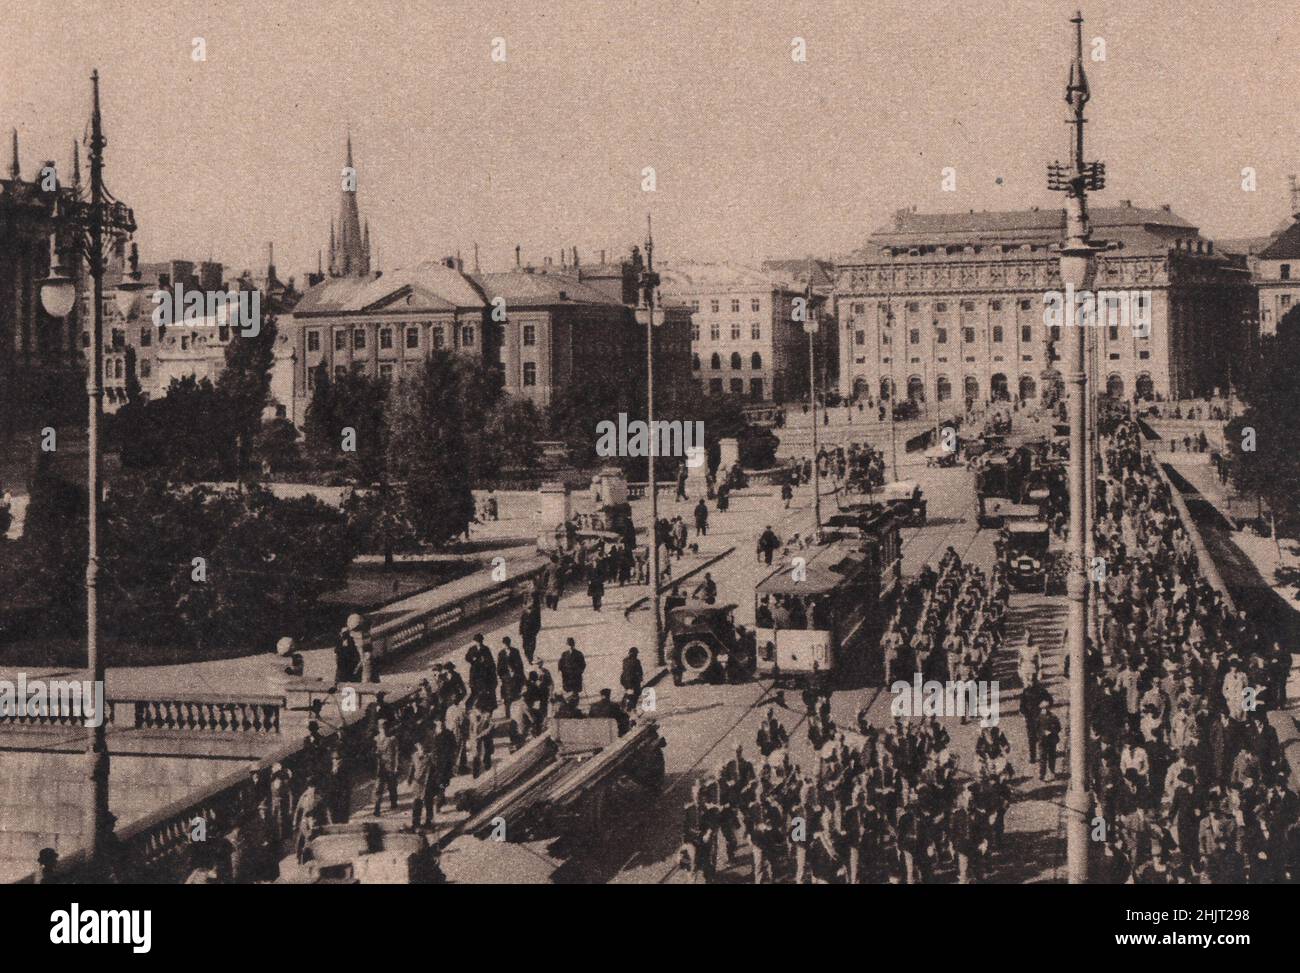 The Norrbro, or North Bridge, is the centre of the city and over it march the guards to be mounted at the royal palace. Sweden. Stockholm (1923) Stock Photo